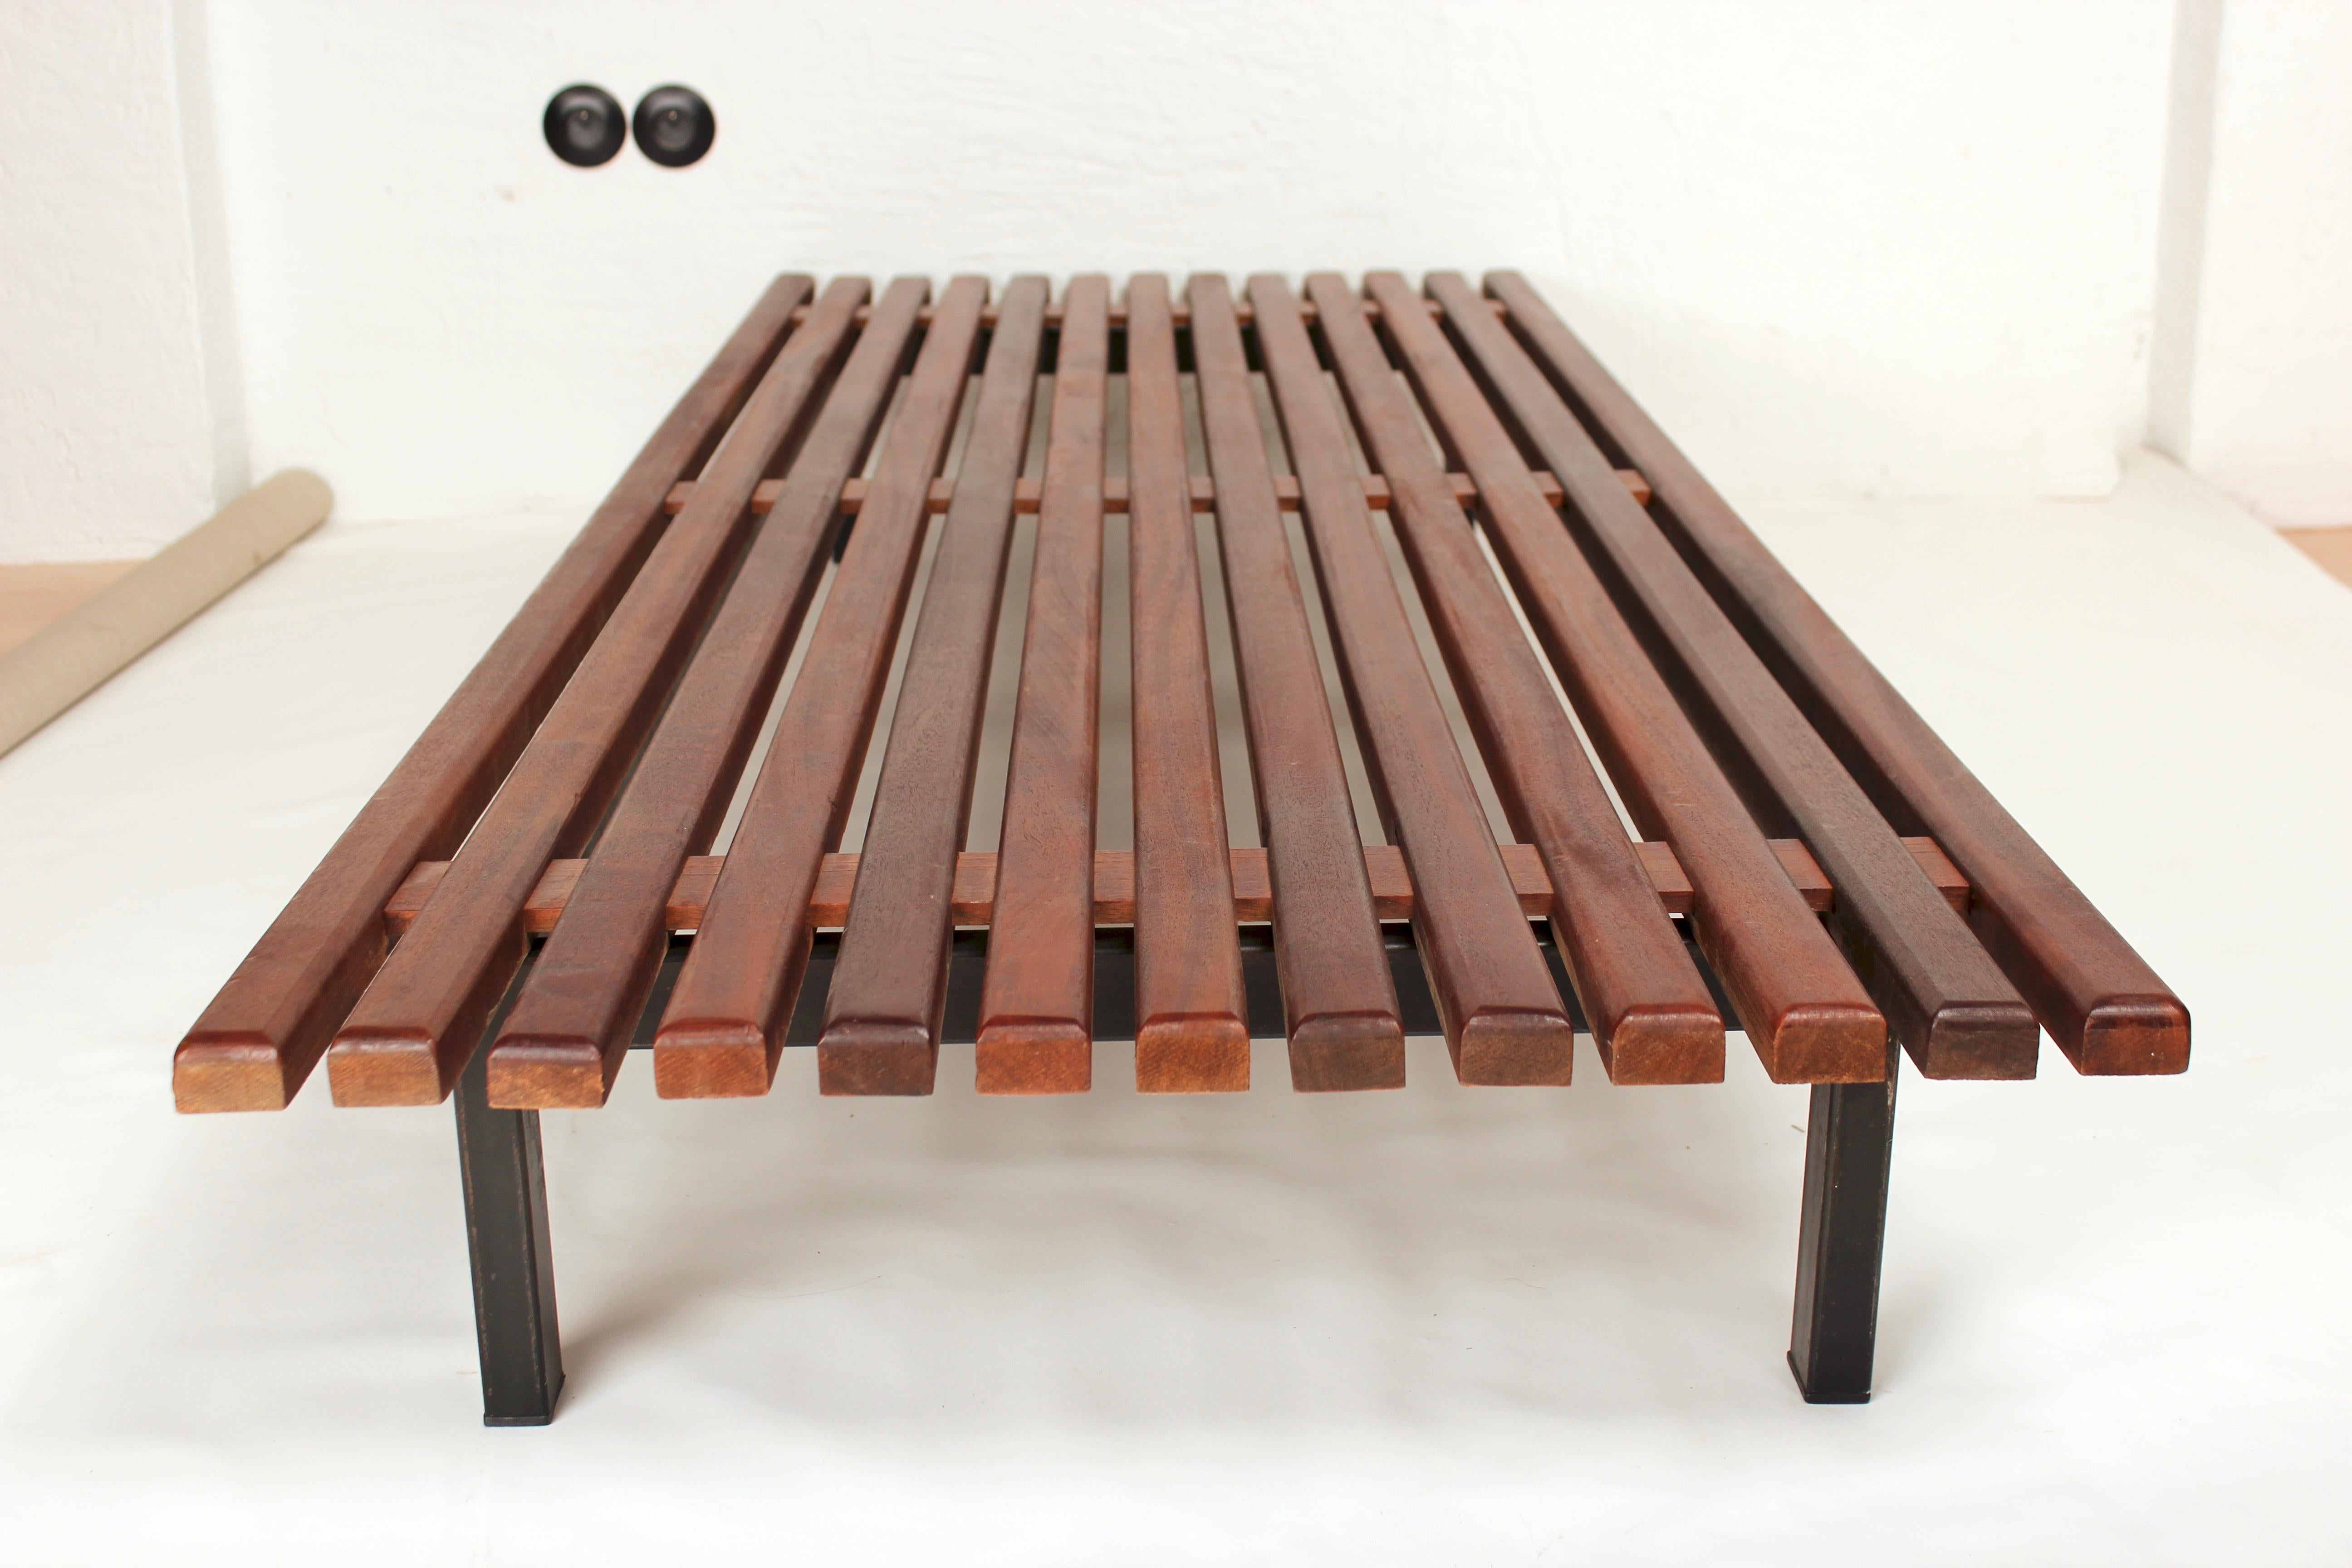 Mahogany bench by Charlotte Perriand from Cansado (Mauritania), circa 1958 for Steph Simon.
This bench can be used as a large coffee table, or a low modernist daybed
Mahogany top has been gently refinished. Metal frame is in great, original